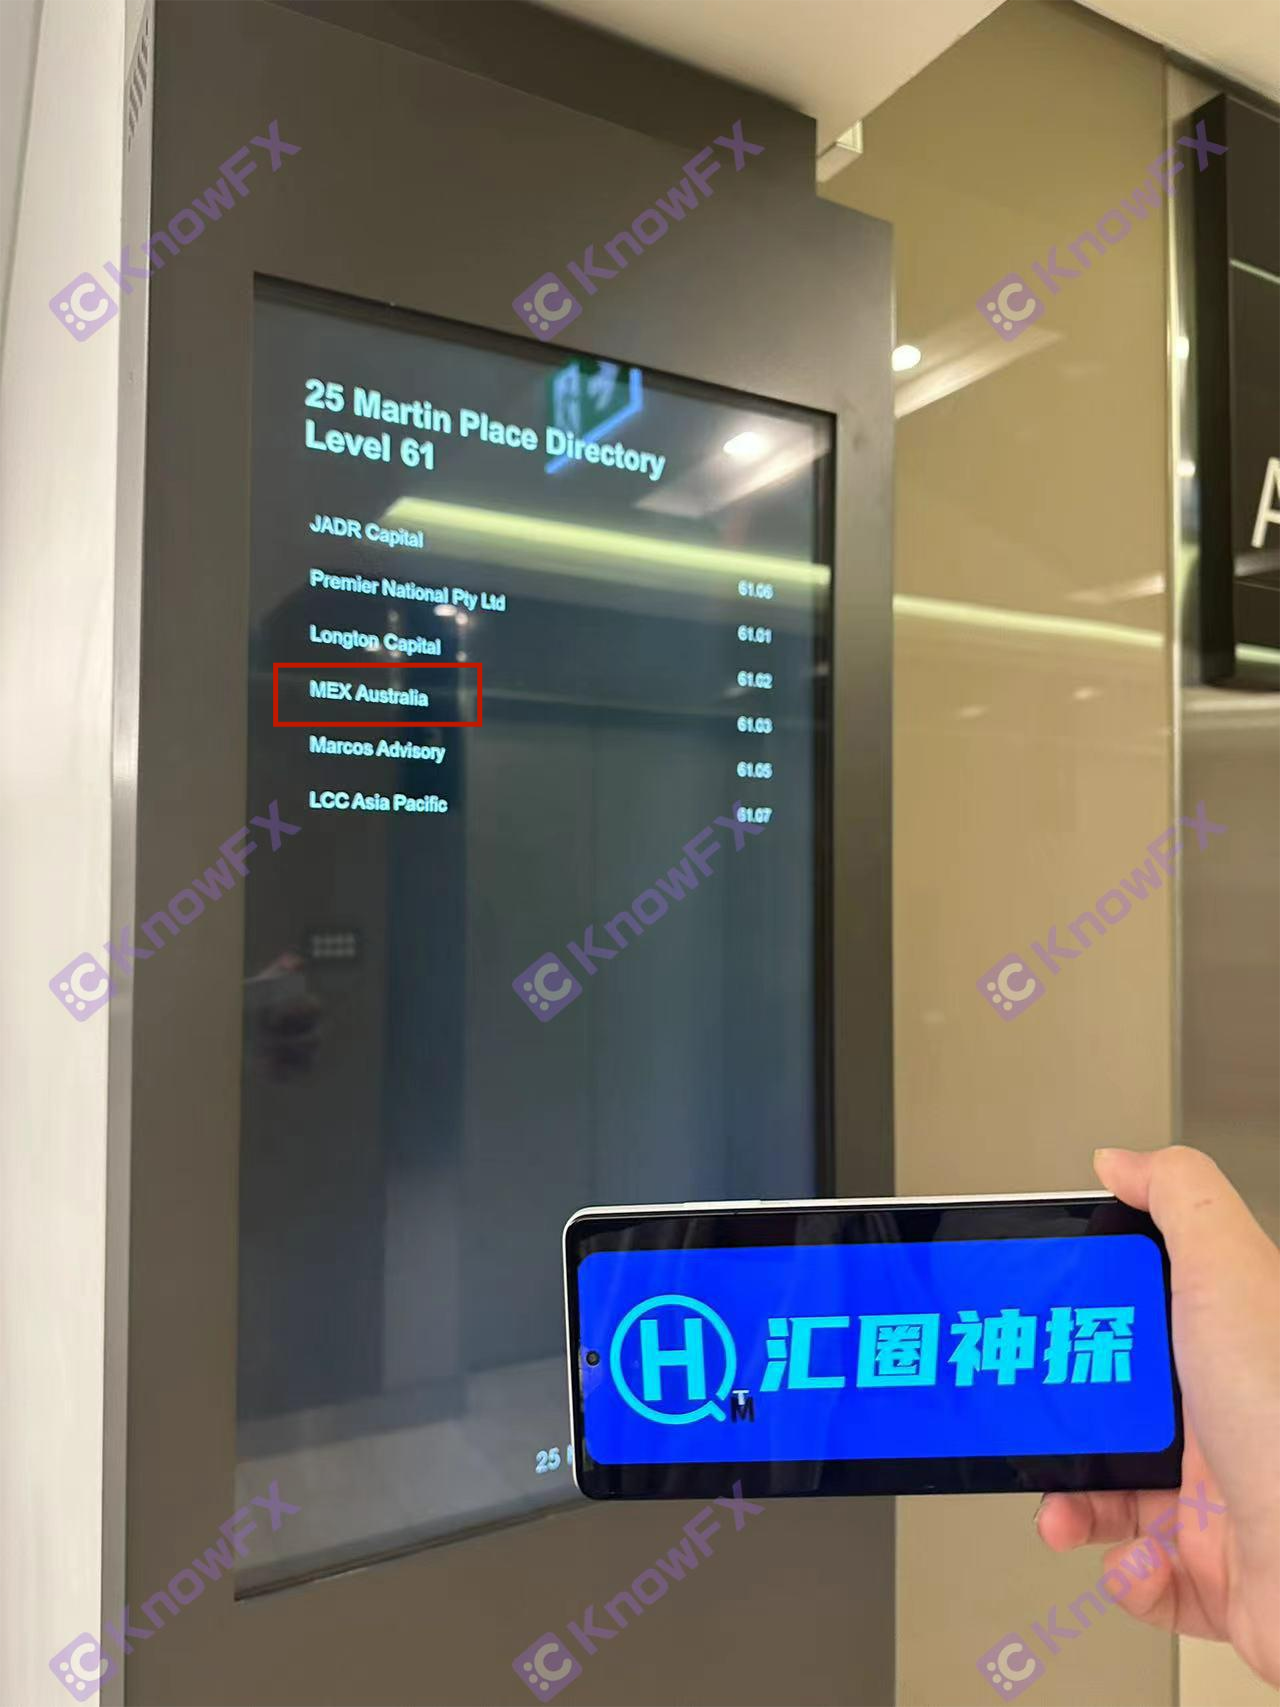 Forex securities firms Multibank Group Datong Financial Group uses a registered company to pretend to be a foreign exchange transaction!Self -developed app dipped in MT4, 5-第1张图片-要懂汇圈网